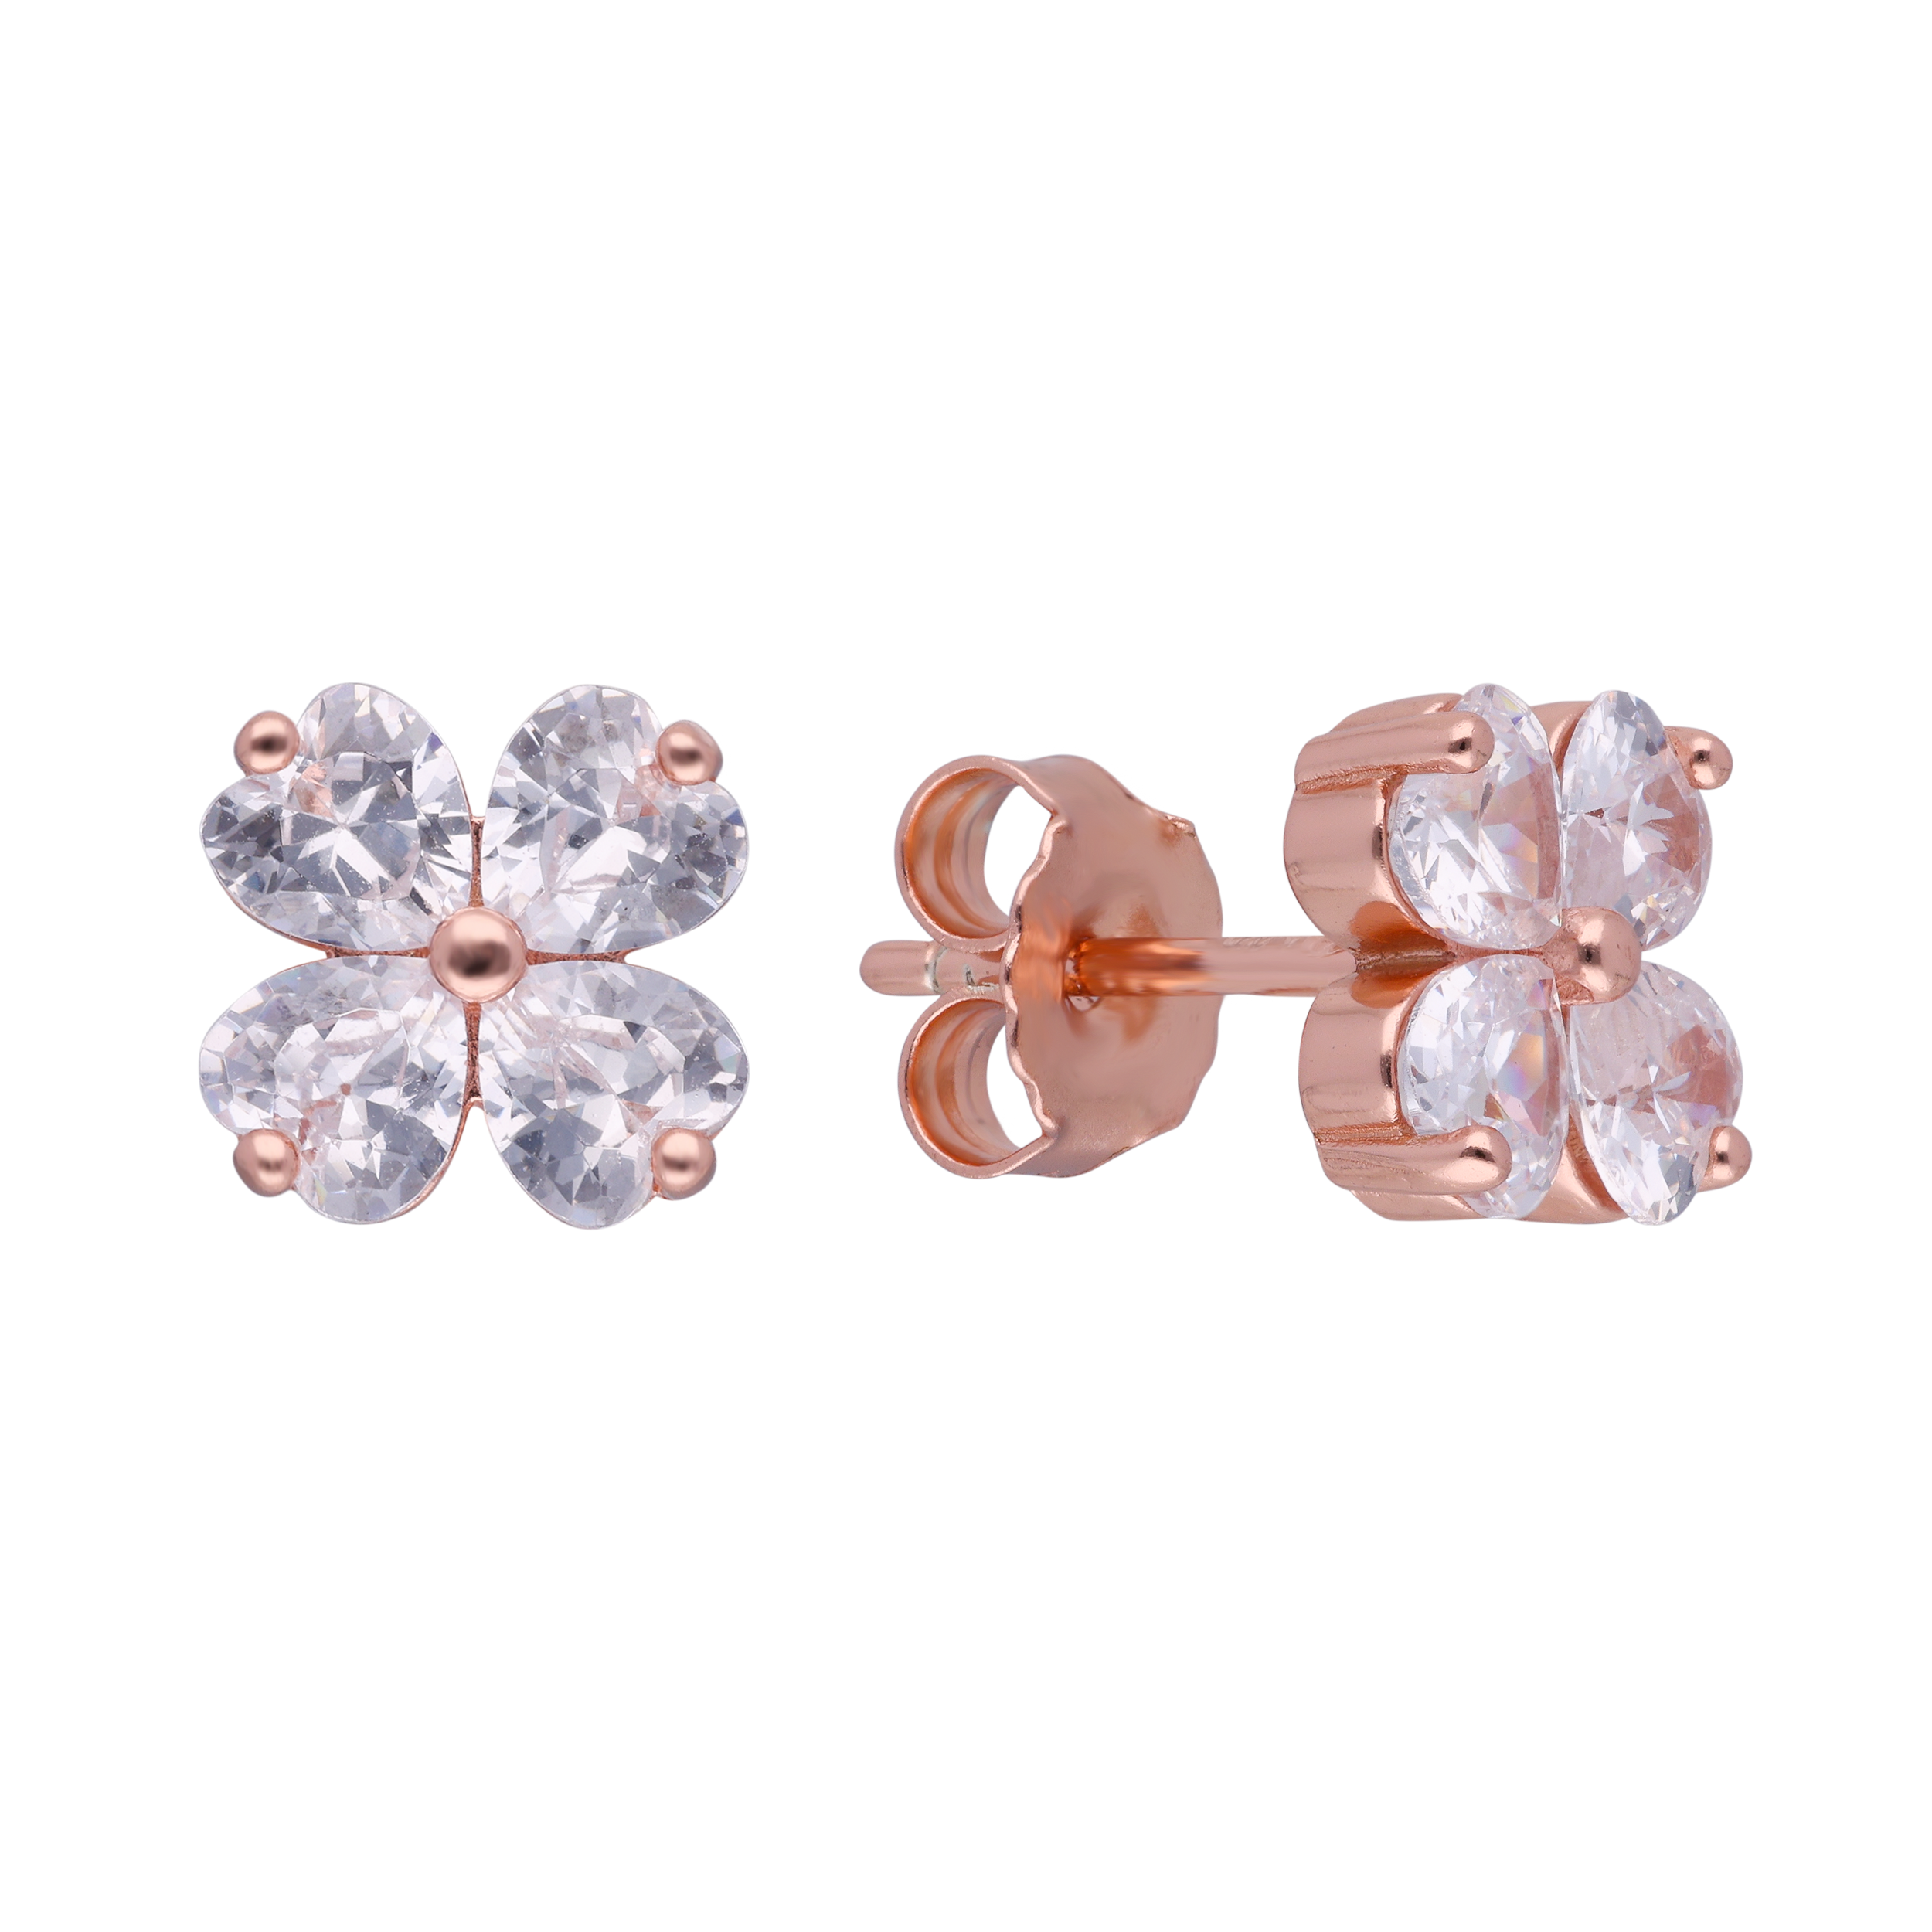 Blossoming Radiance: Sterling Silver Studs | SKU: 0019272610, 0019272450, 0019272795, 0019272757